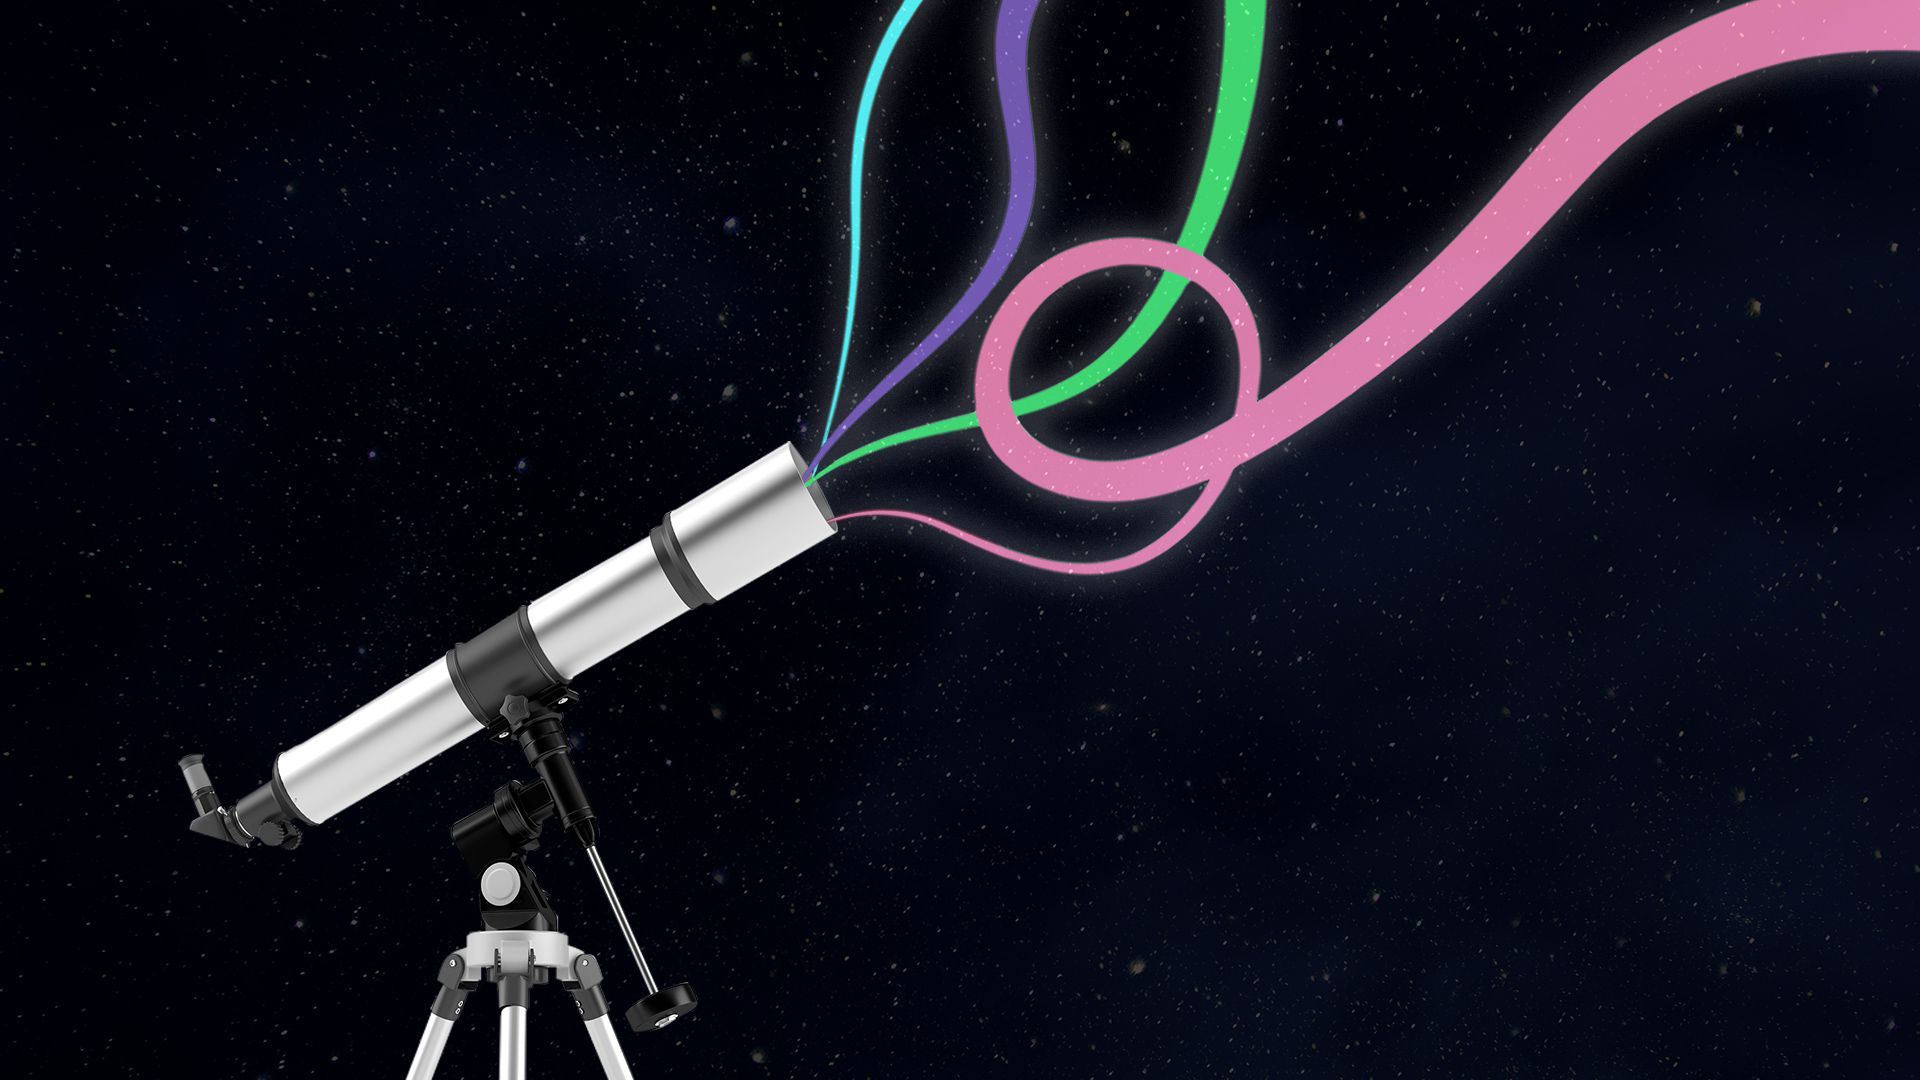 Illustration of a telescope in space with colorful lines.